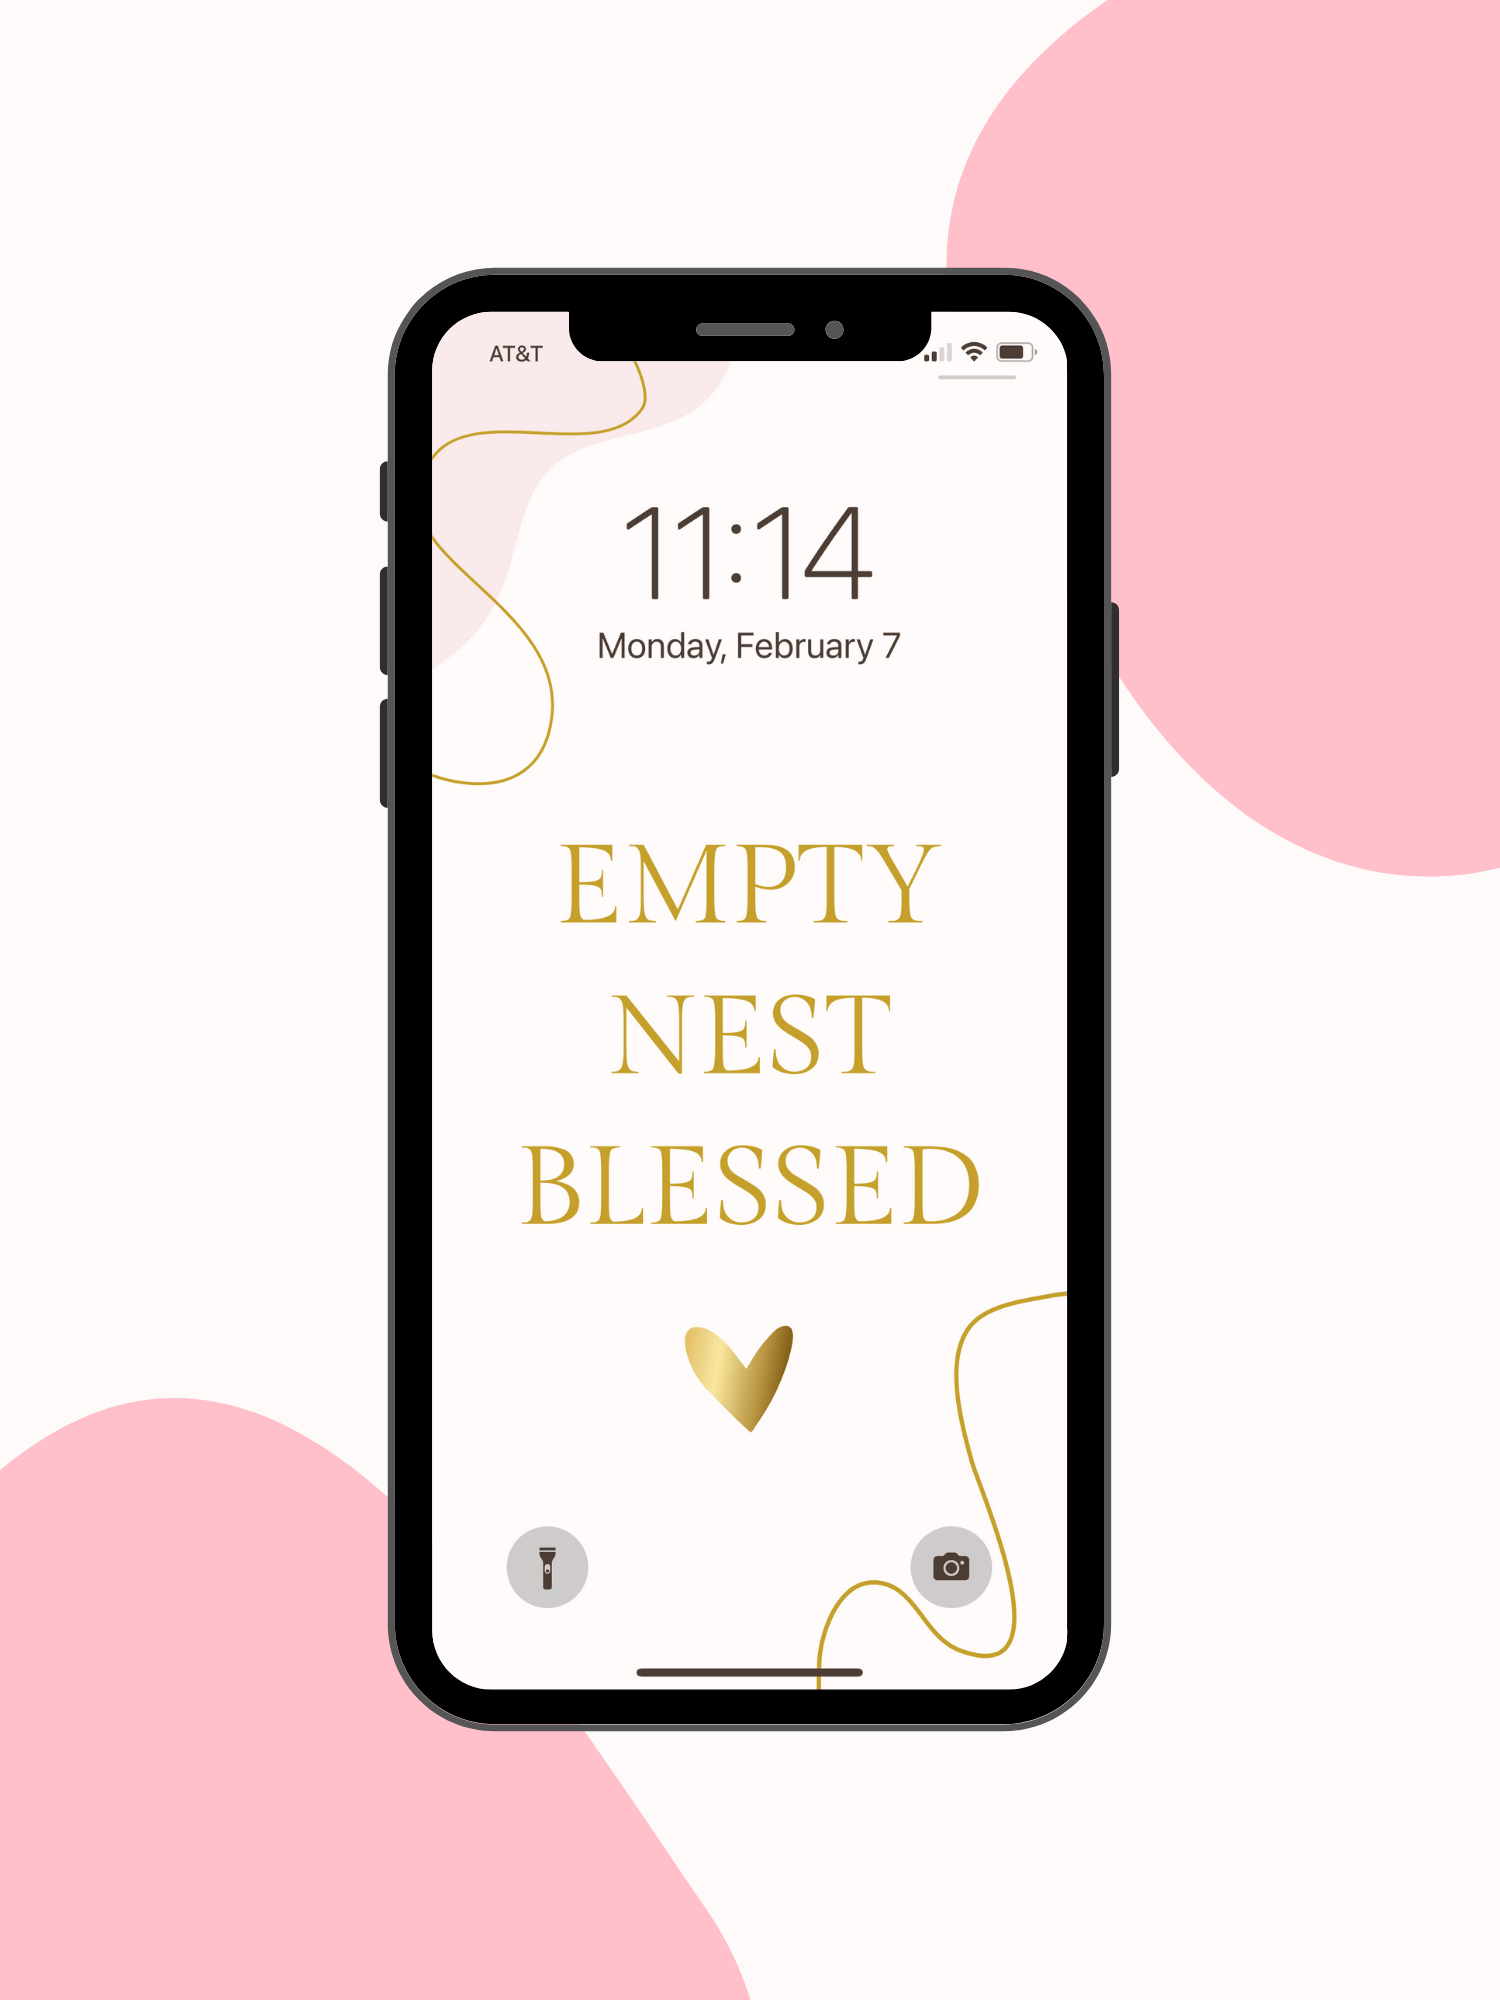 How to Download and Set an Image as Your iPhone Wallpaper – Empty Nest  Blessed